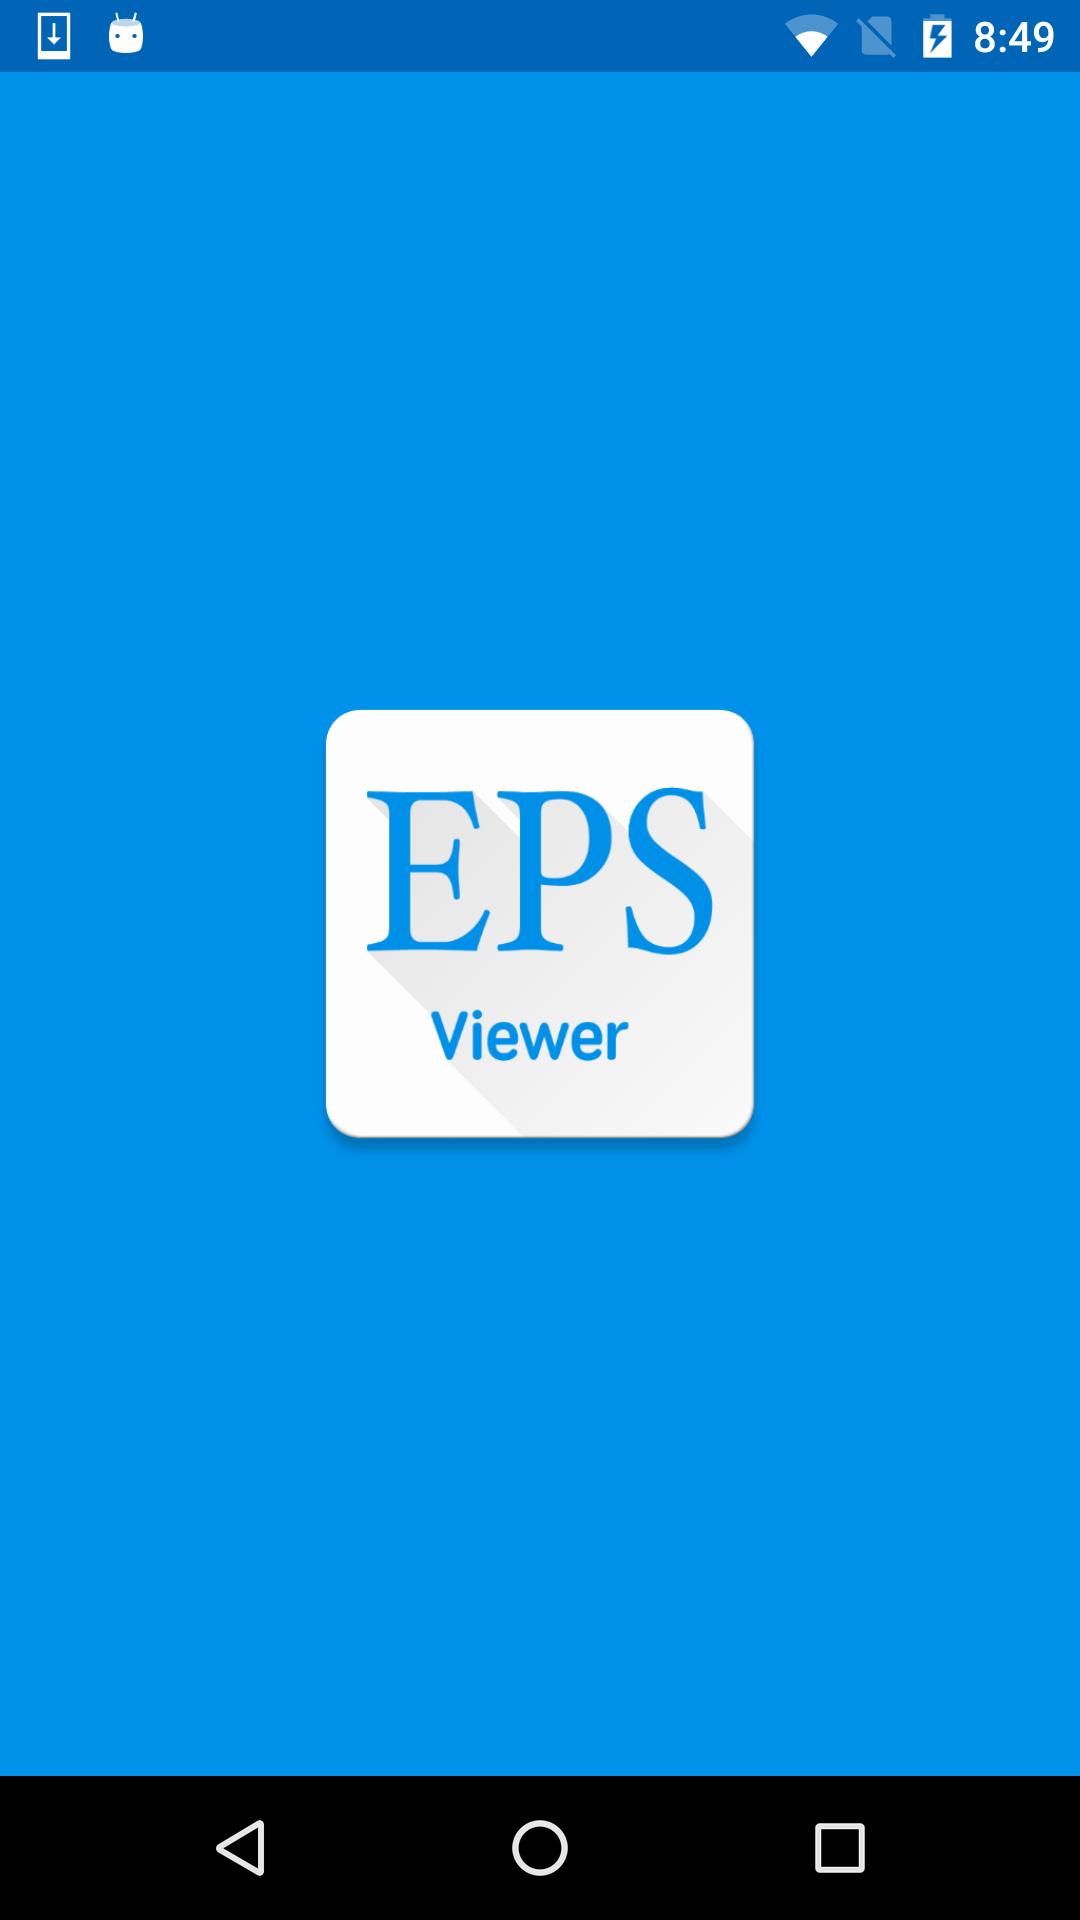 Eps Encapsulated Postscript File Viewer For Android Apk Download